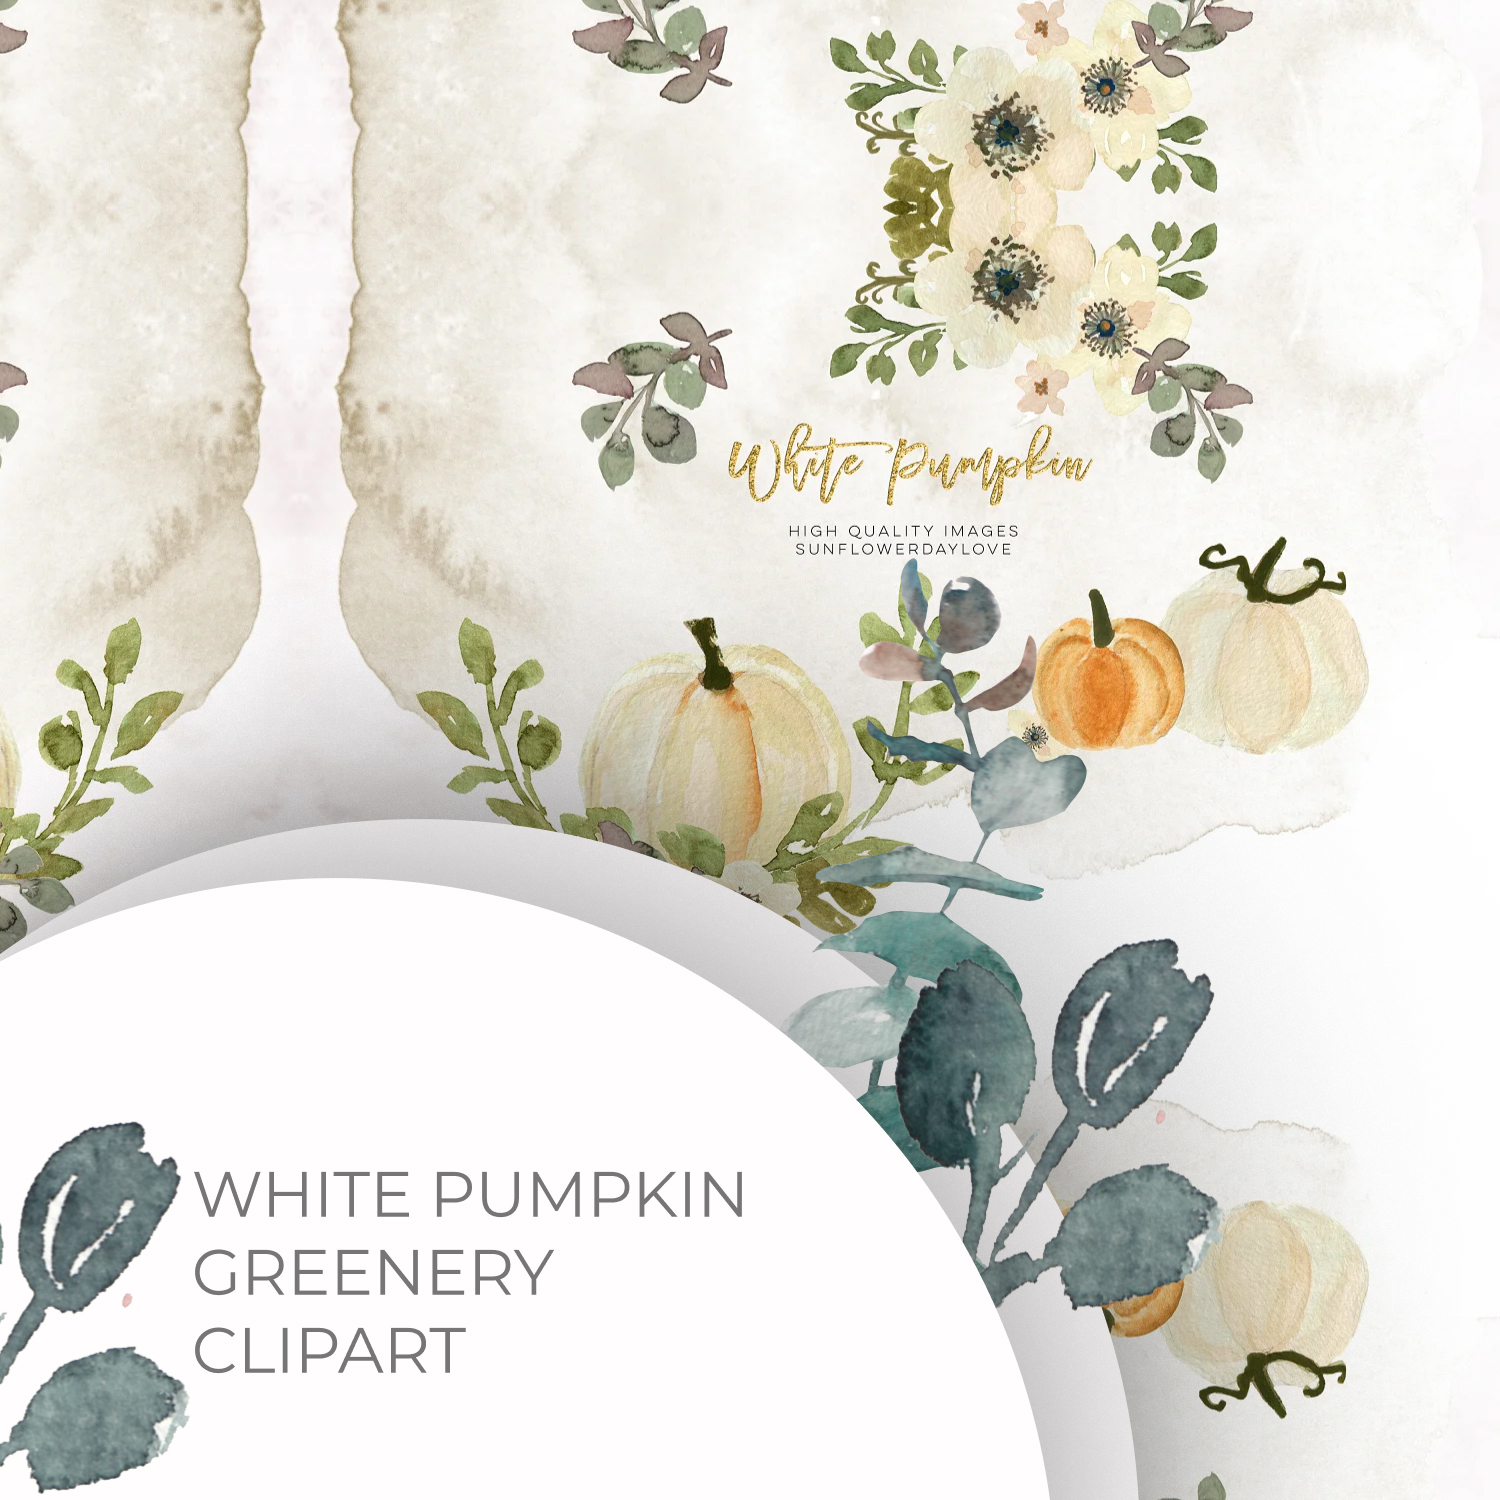 White Pumpkin Greenery Clipart cover image.